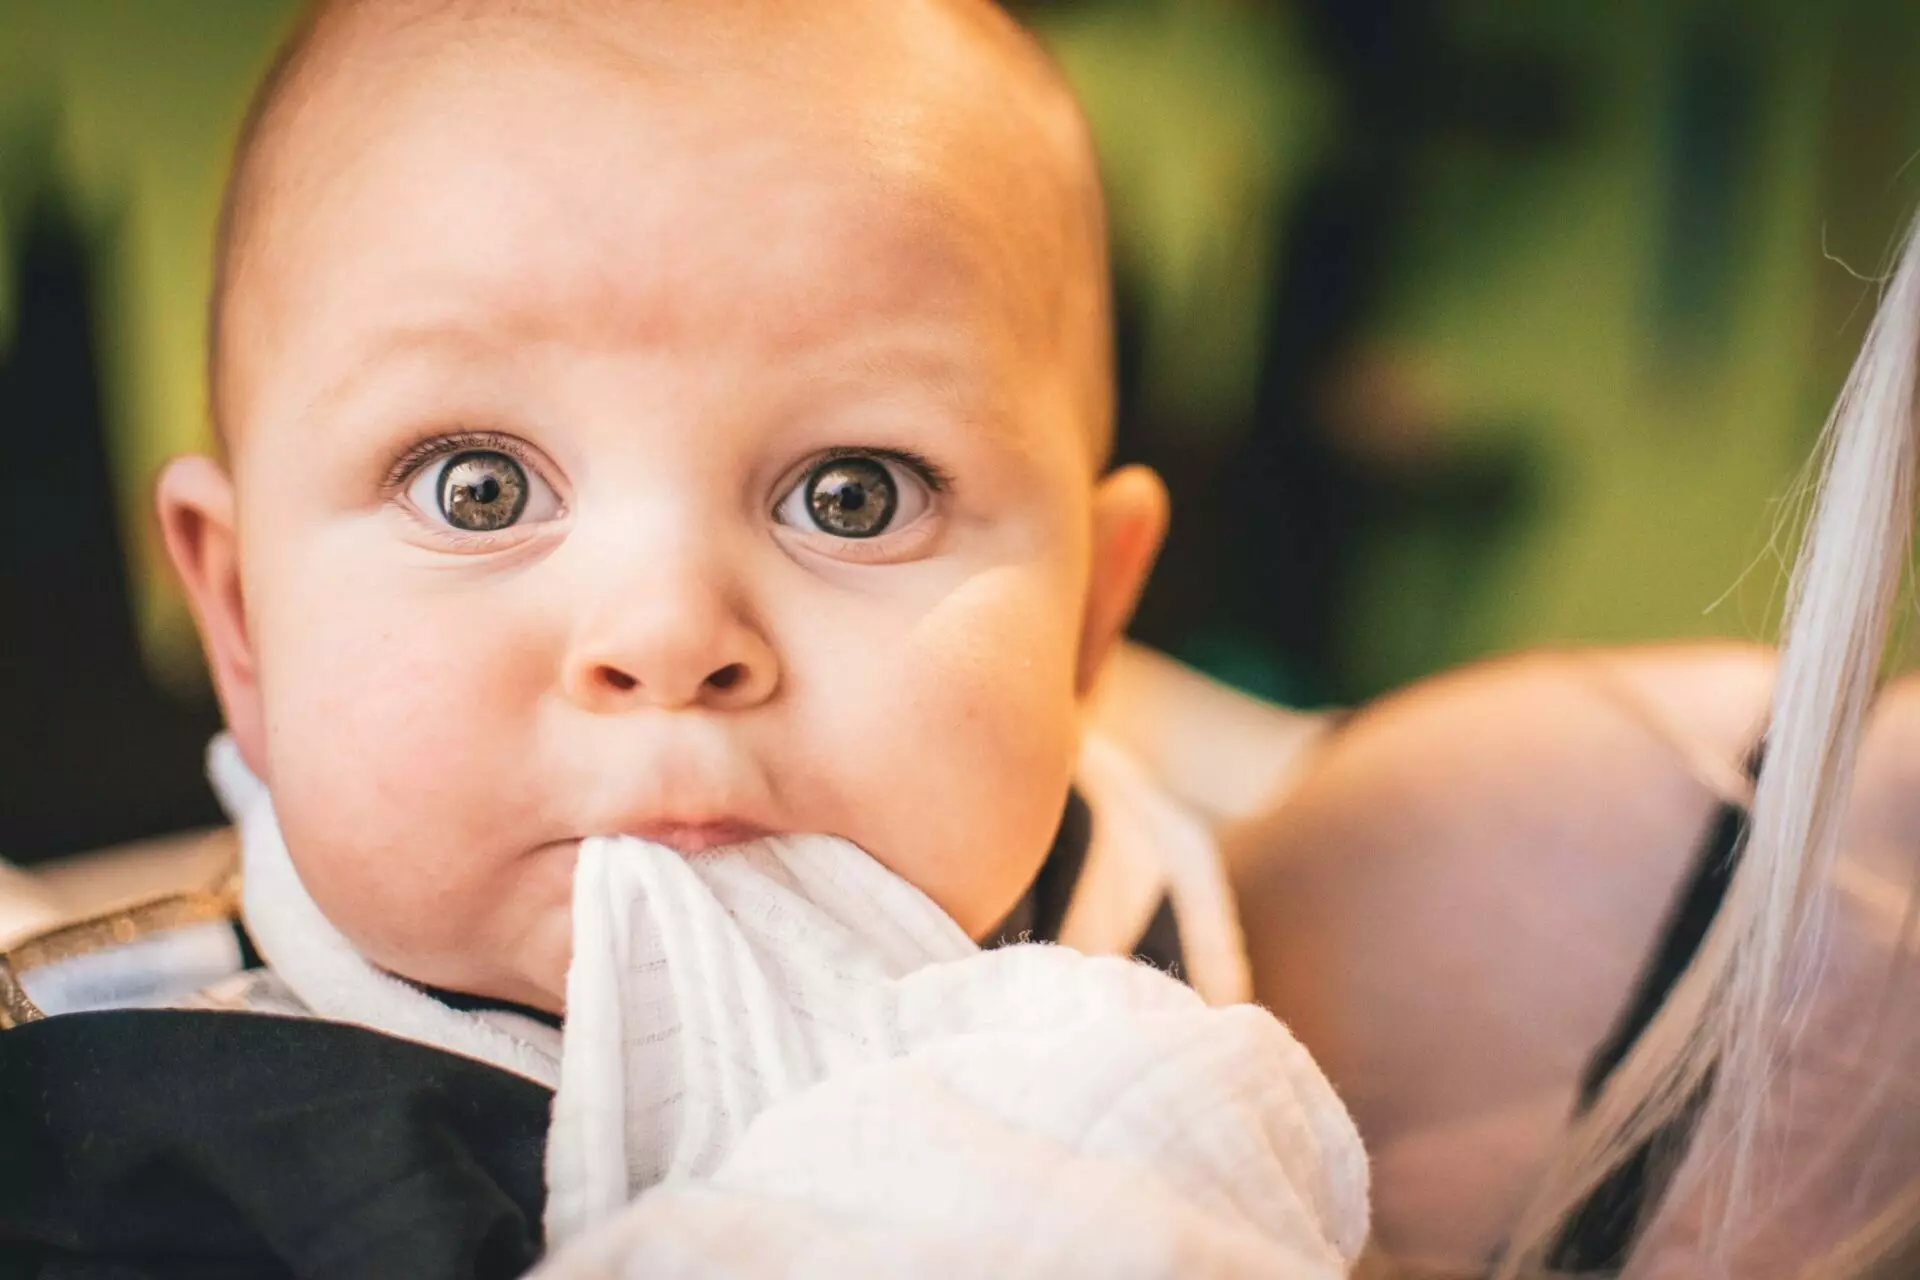 10 Safest And Best Chemical-Free Baby Wipes For Sensitive Baby Skin